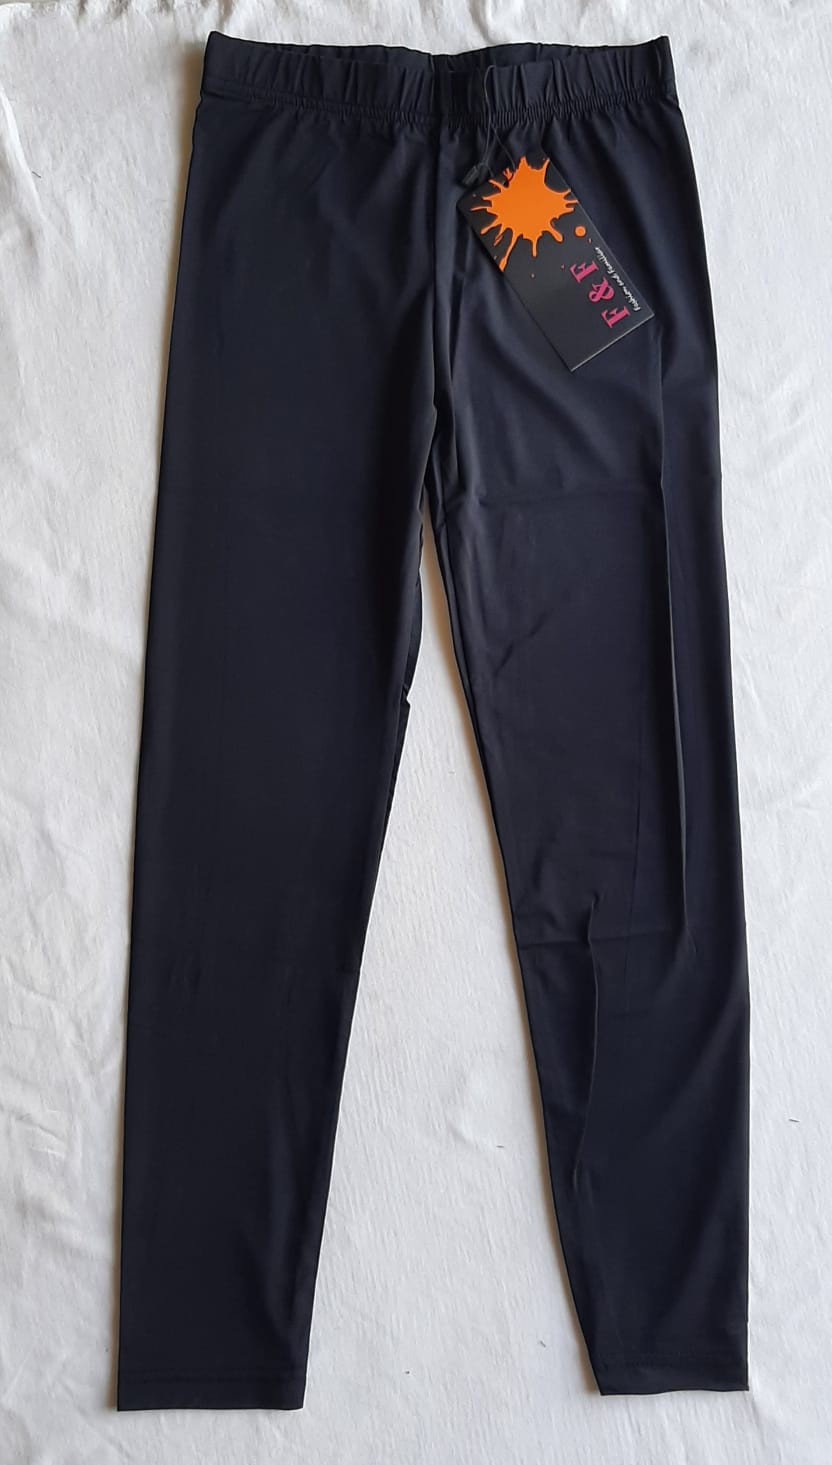 Outdoor Voices Gray Two-Toned Warmup Leggings Small | eBay